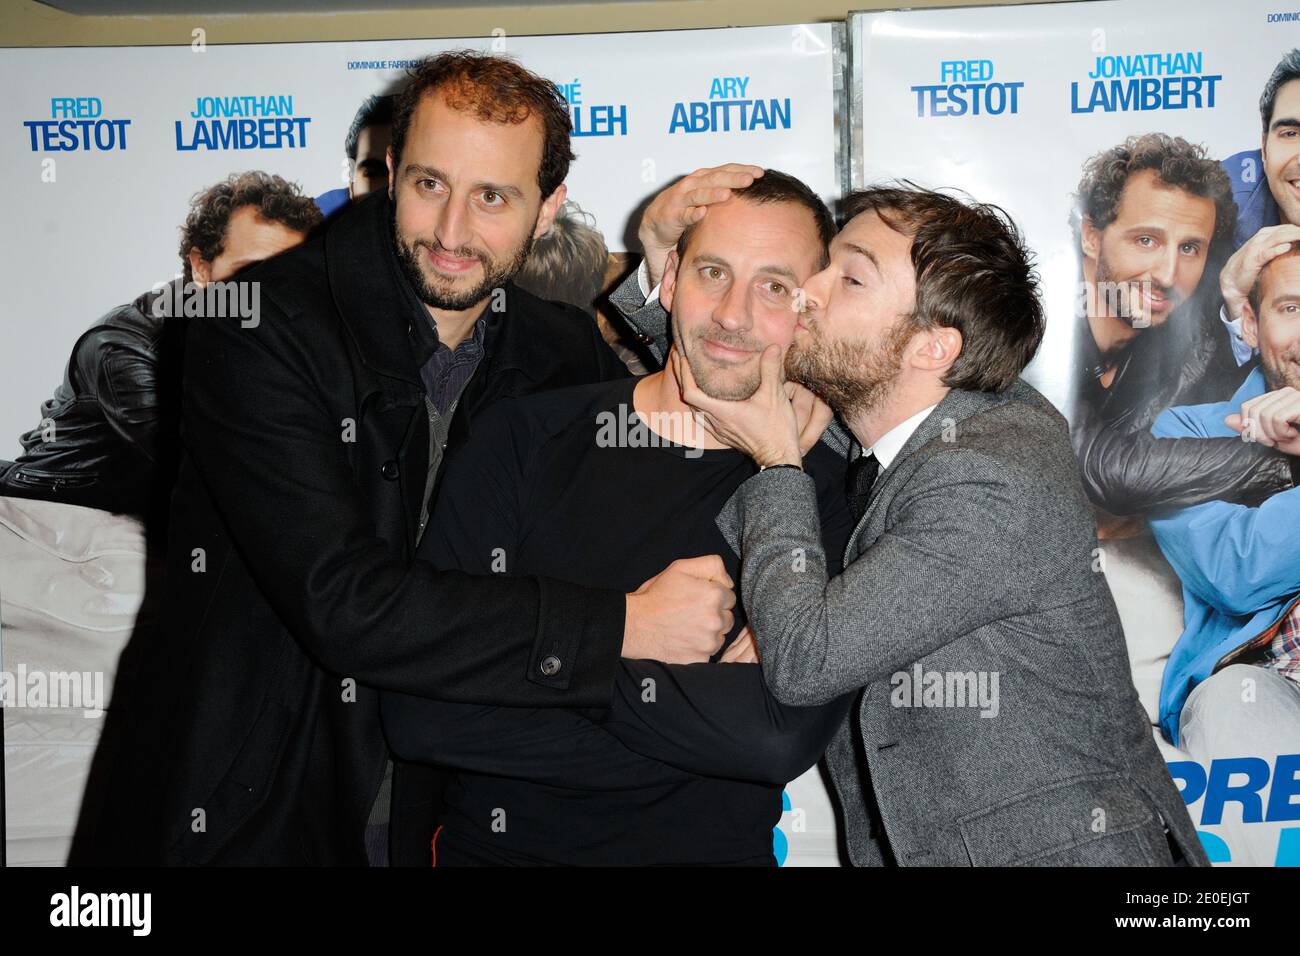 Fred Testot , Jonathan Lambert and Arie Elmaleh attending the premiere of ' Depression et des Potes' at UGC Les Halles theater, in Paris, France on  April 26, 2012. Photo by Alban Wyters/ABACAPRESS.COM